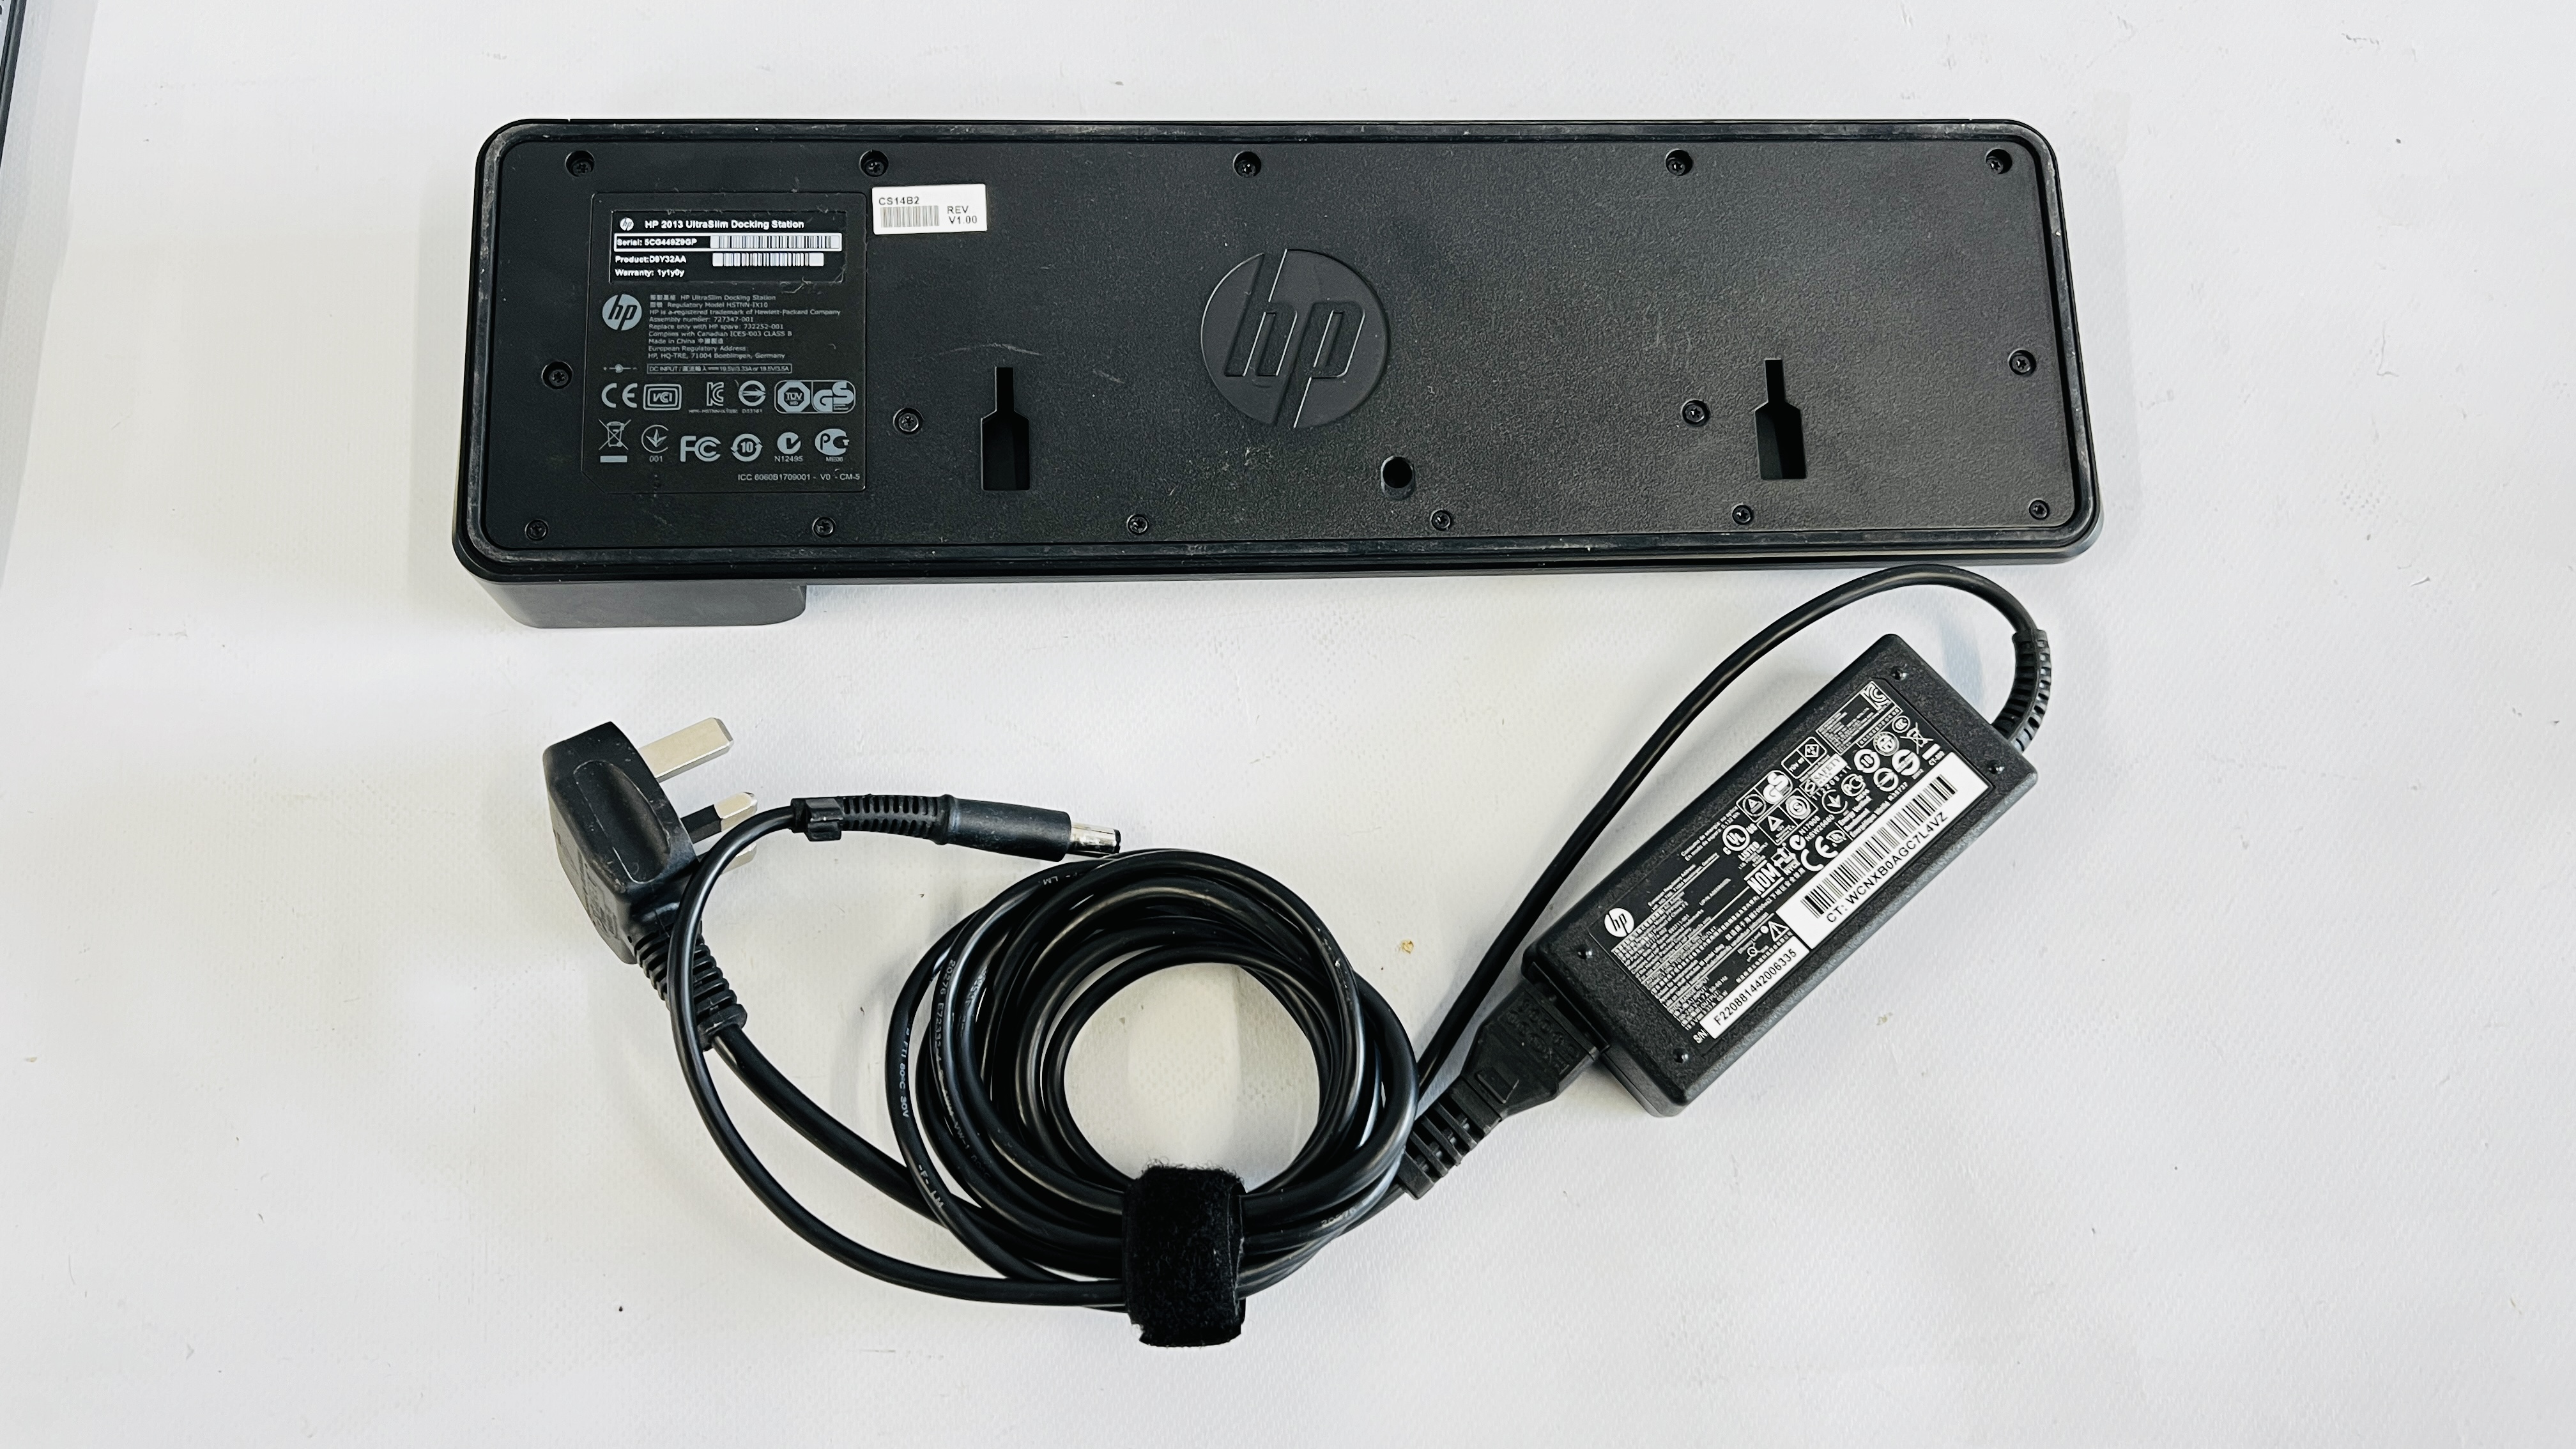 HP ELITEBOOK 840 LAPTOP CORE i5 COMPLETE WITH CHARGER & HP ULTRASLIM DOCKING STATION - NO OPERATING - Image 6 of 6